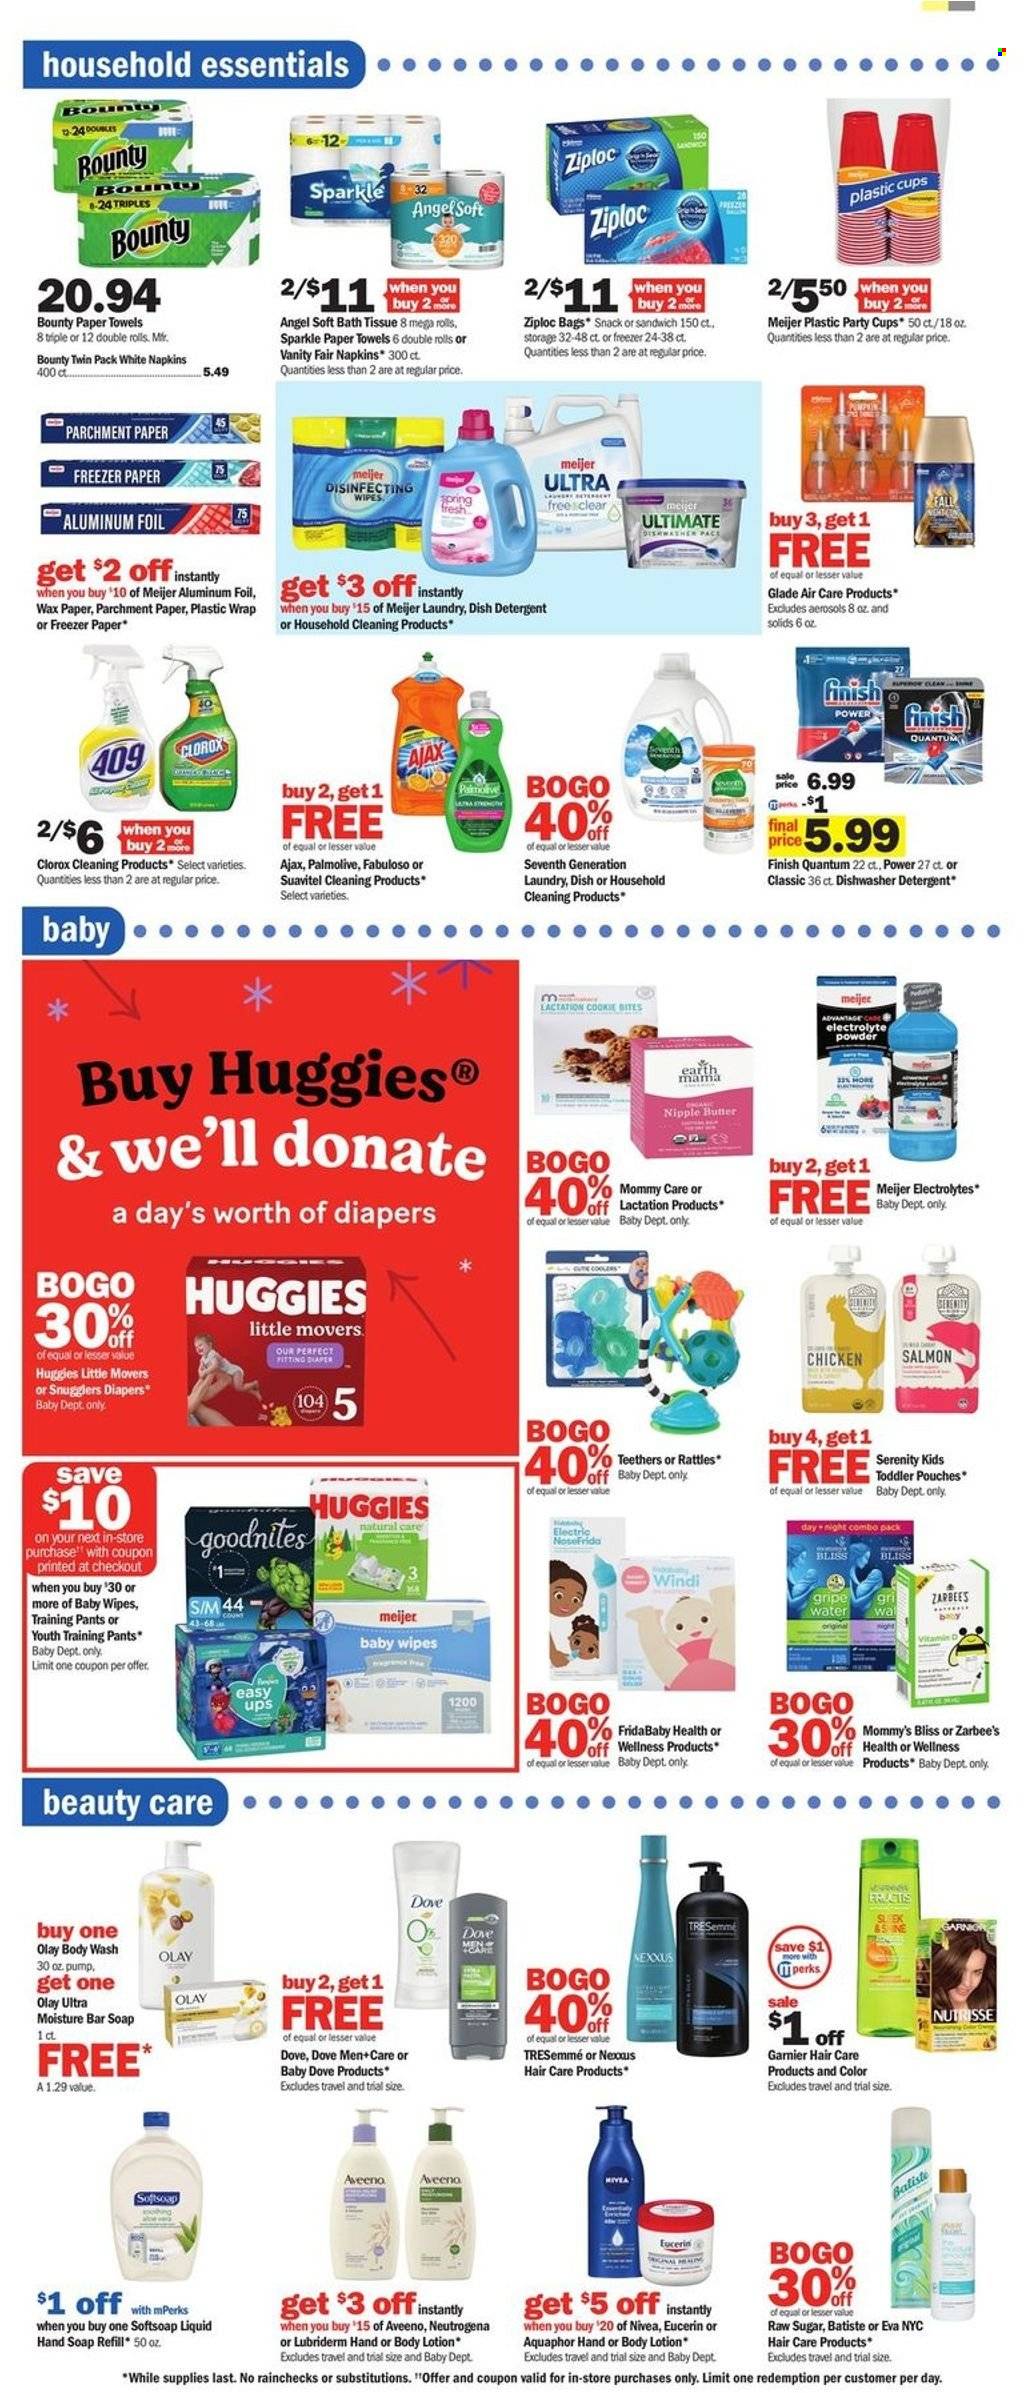 thumbnail - Meijer Flyer - 09/25/2022 - 10/01/2022 - Sales products - salmon, sandwich, butter, Dove, snack, Bounty, baby food pouch, wipes, Huggies, pants, baby wipes, napkins, nappies, baby pants, Aquaphor, Aveeno, Nivea, bath tissue, kitchen towels, paper towels, detergent, Clorox, Ajax, Fabuloso, dishwasher cleaner, Finish Powerball, Finish Quantum Ultimate, body wash, Softsoap, hand soap, Palmolive, soap bar, Raw Sugar, soap, Garnier, Neutrogena, Olay, TRESemmé, Nexxus, Fructis, body lotion, Eucerin, Lubriderm, Ziploc, cup, aluminium foil, Glade, party cups, pump. Page 11.